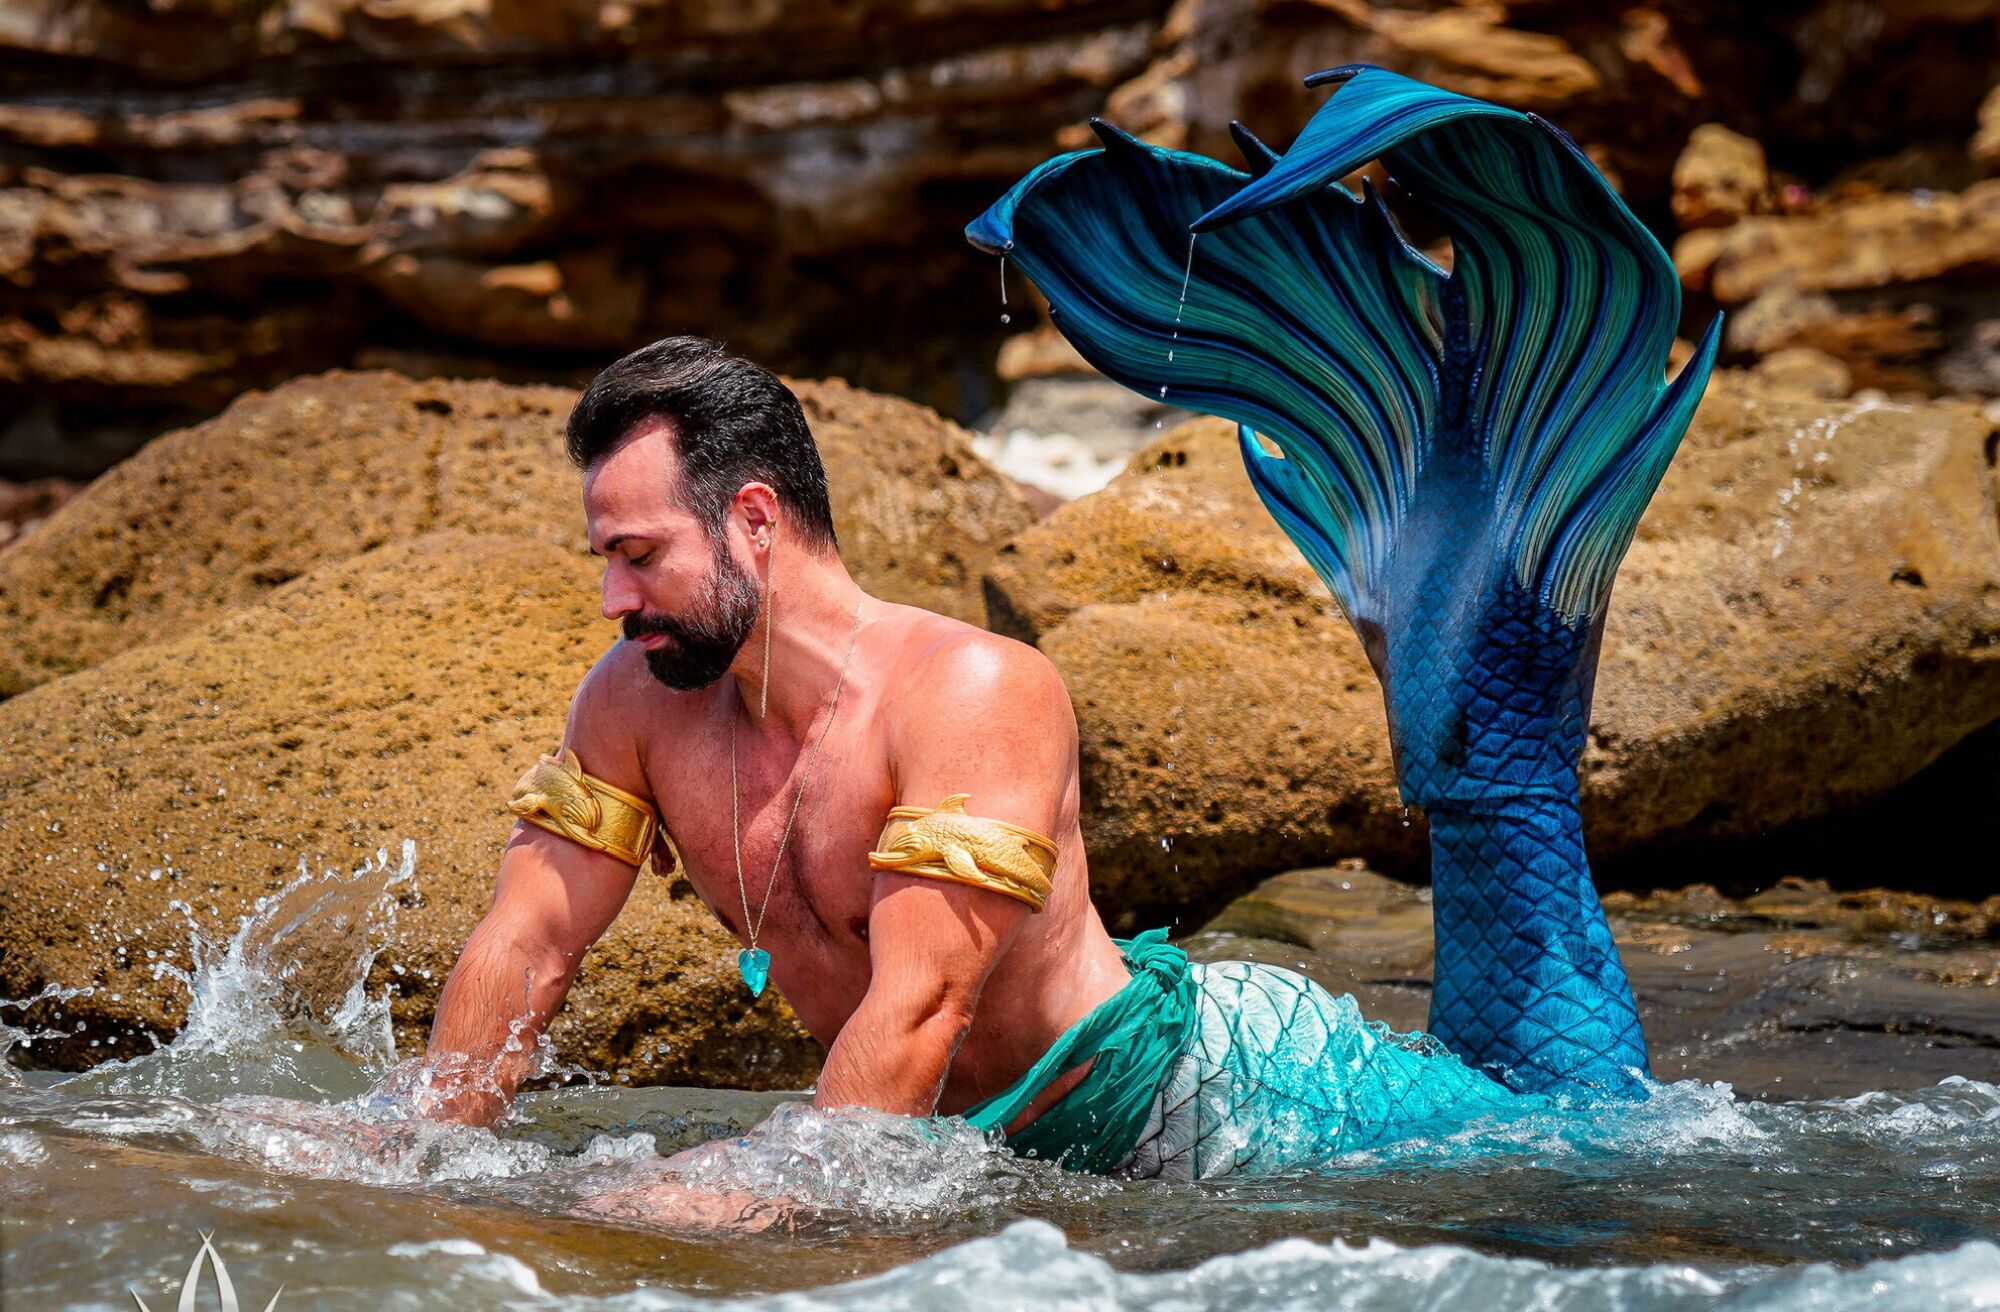 Jack Laflin wearing a mermaid costume while posing in a body of water